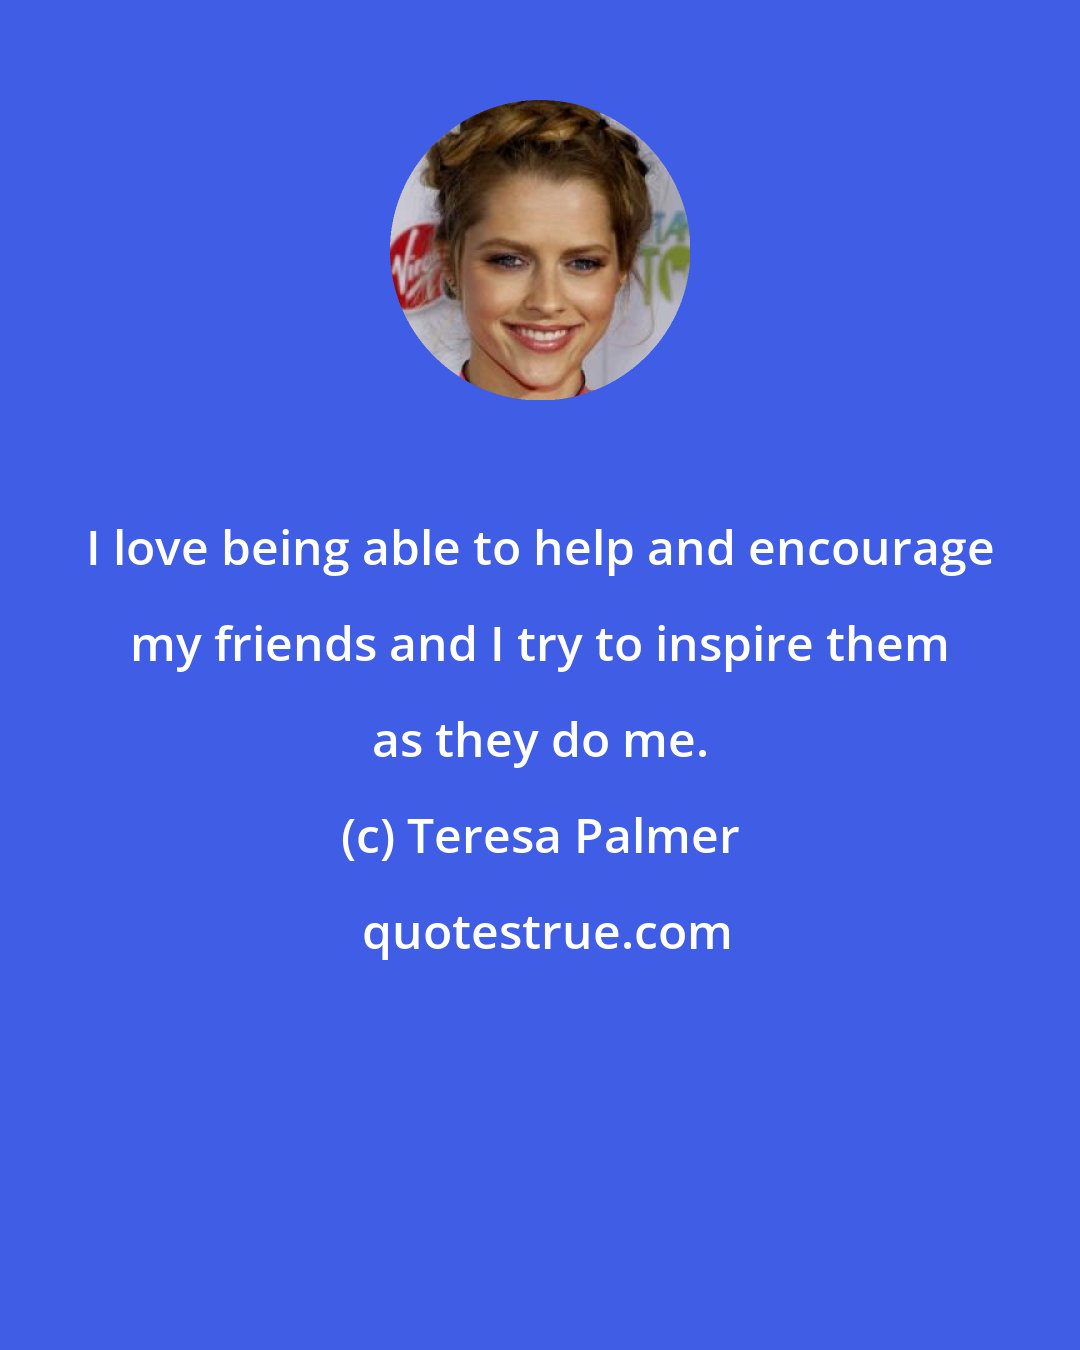 Teresa Palmer: I love being able to help and encourage my friends and I try to inspire them as they do me.